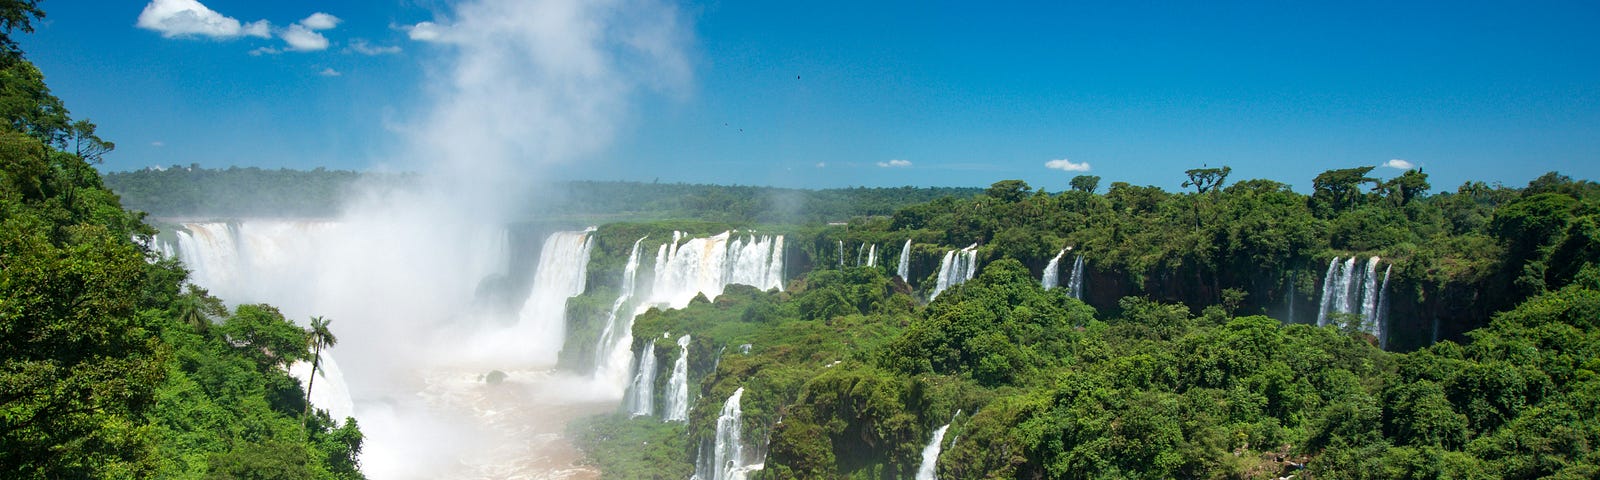 A picture of the Iguazu waterfalls